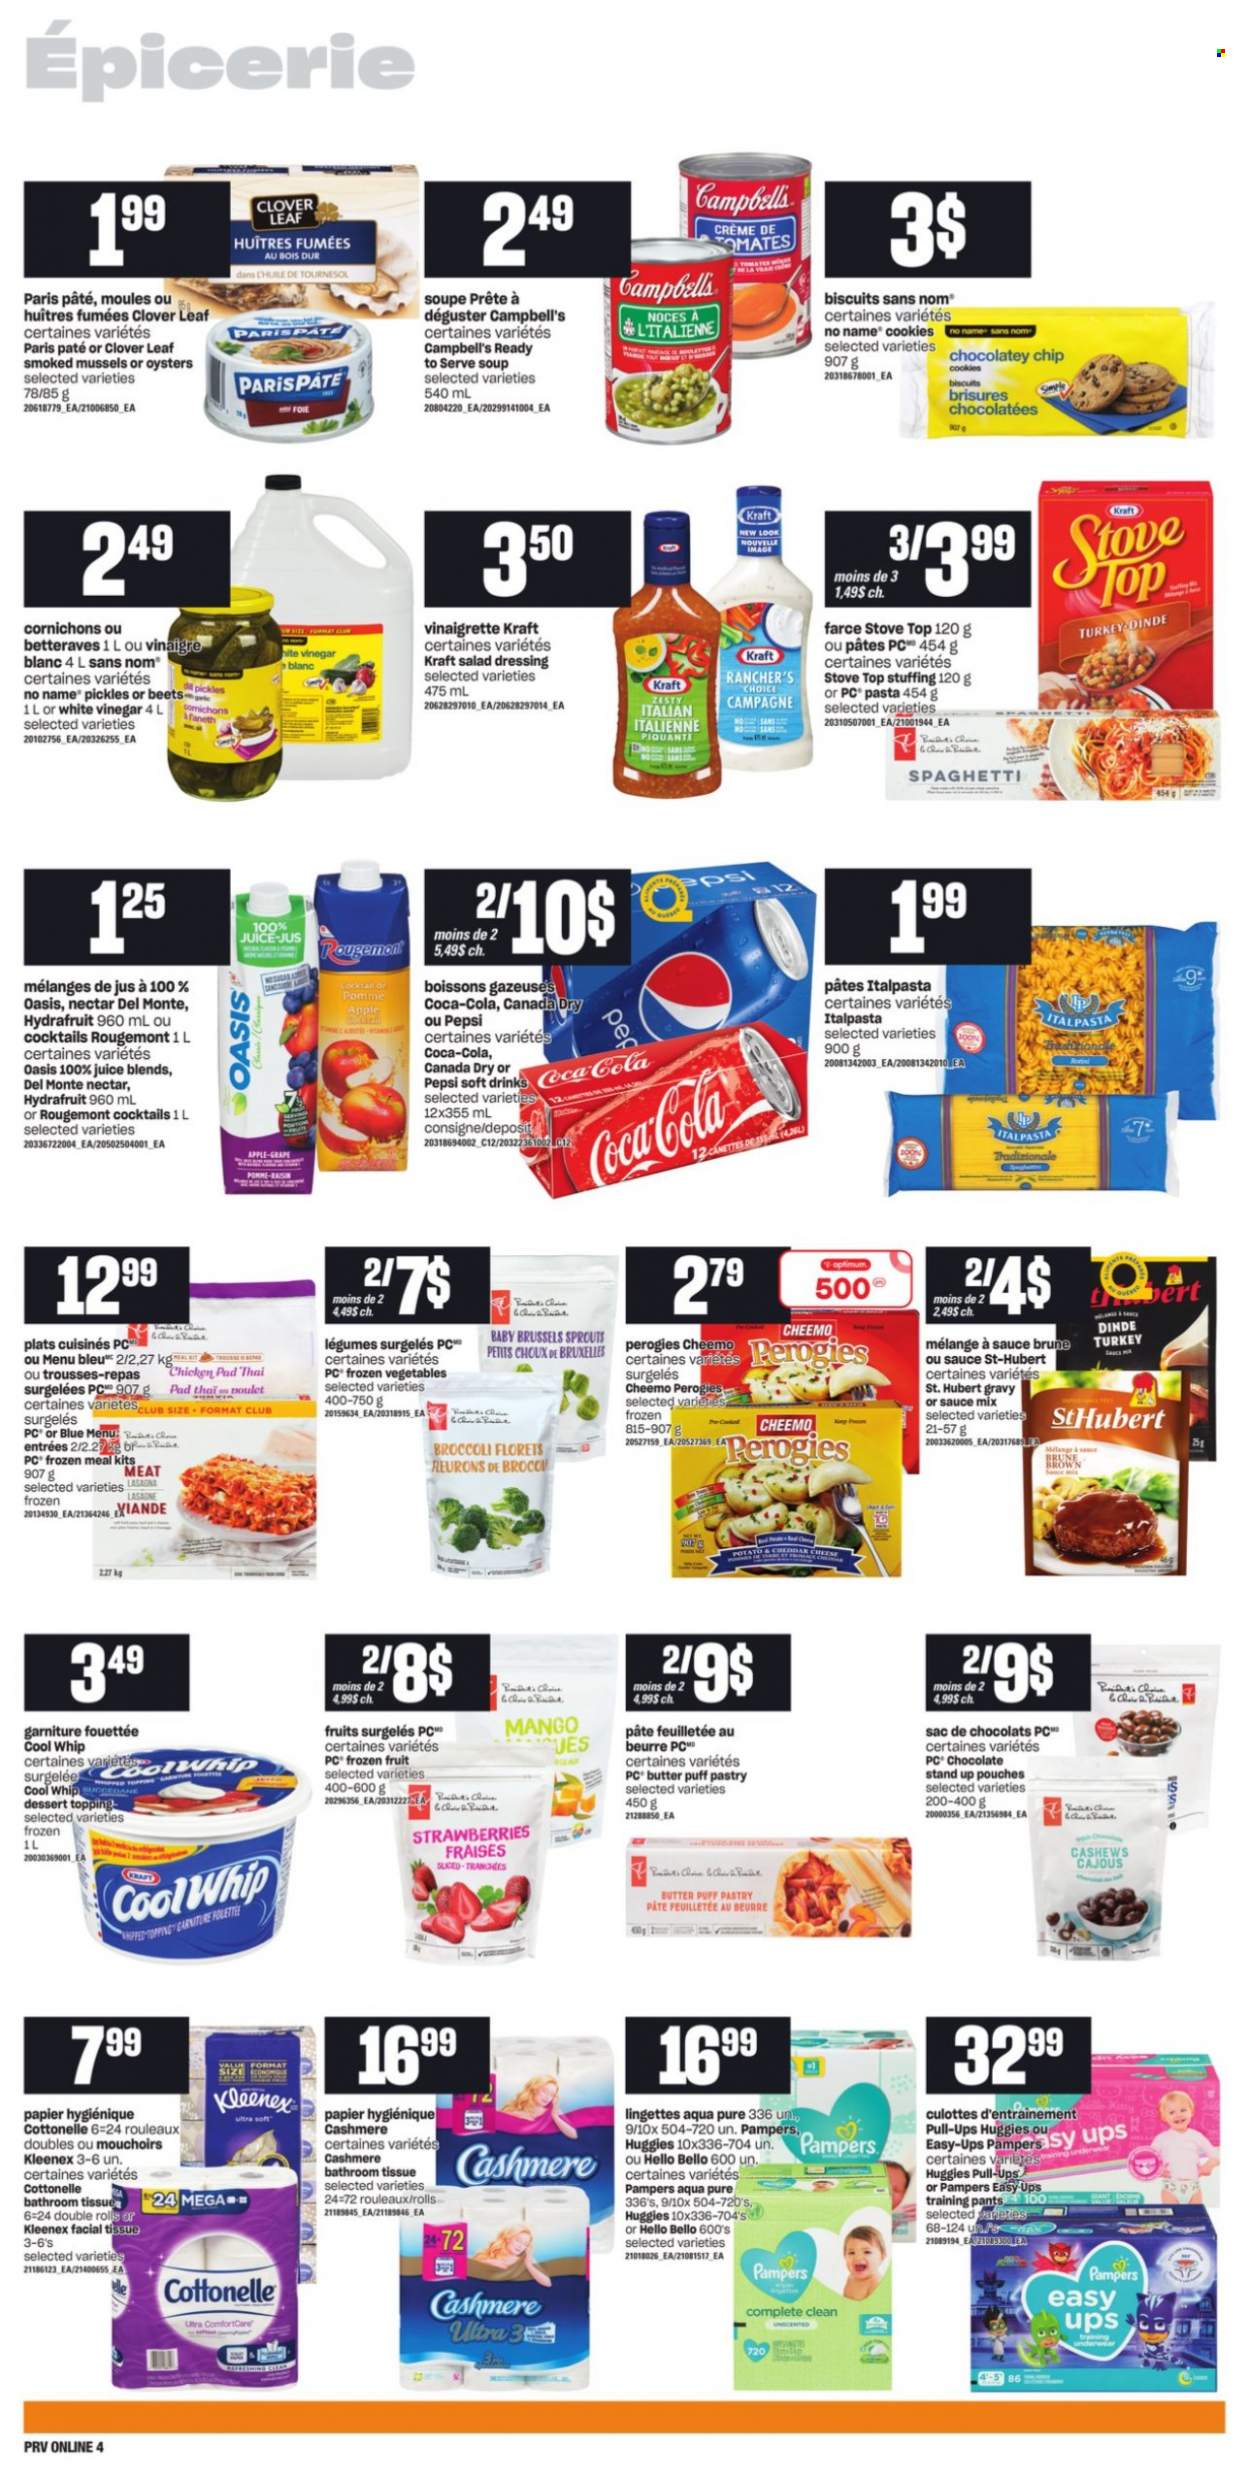 thumbnail - Provigo Flyer - September 23, 2021 - September 29, 2021 - Sales products - broccoli, brussel sprouts, mango, mussels, oysters, No Name, Campbell's, spaghetti, soup, pasta, lasagna meal, Kraft®, Clover, butter, Cool Whip, puff pastry, frozen vegetables, cookies, chocolate, biscuit, topping, pickles, salad dressing, vinaigrette dressing, dressing, vinegar, cashews, Canada Dry, Coca-Cola, Pepsi, juice, soft drink, pants, baby pants, bath tissue, Cottonelle, Kleenex, Huggies, Pampers. Page 8.